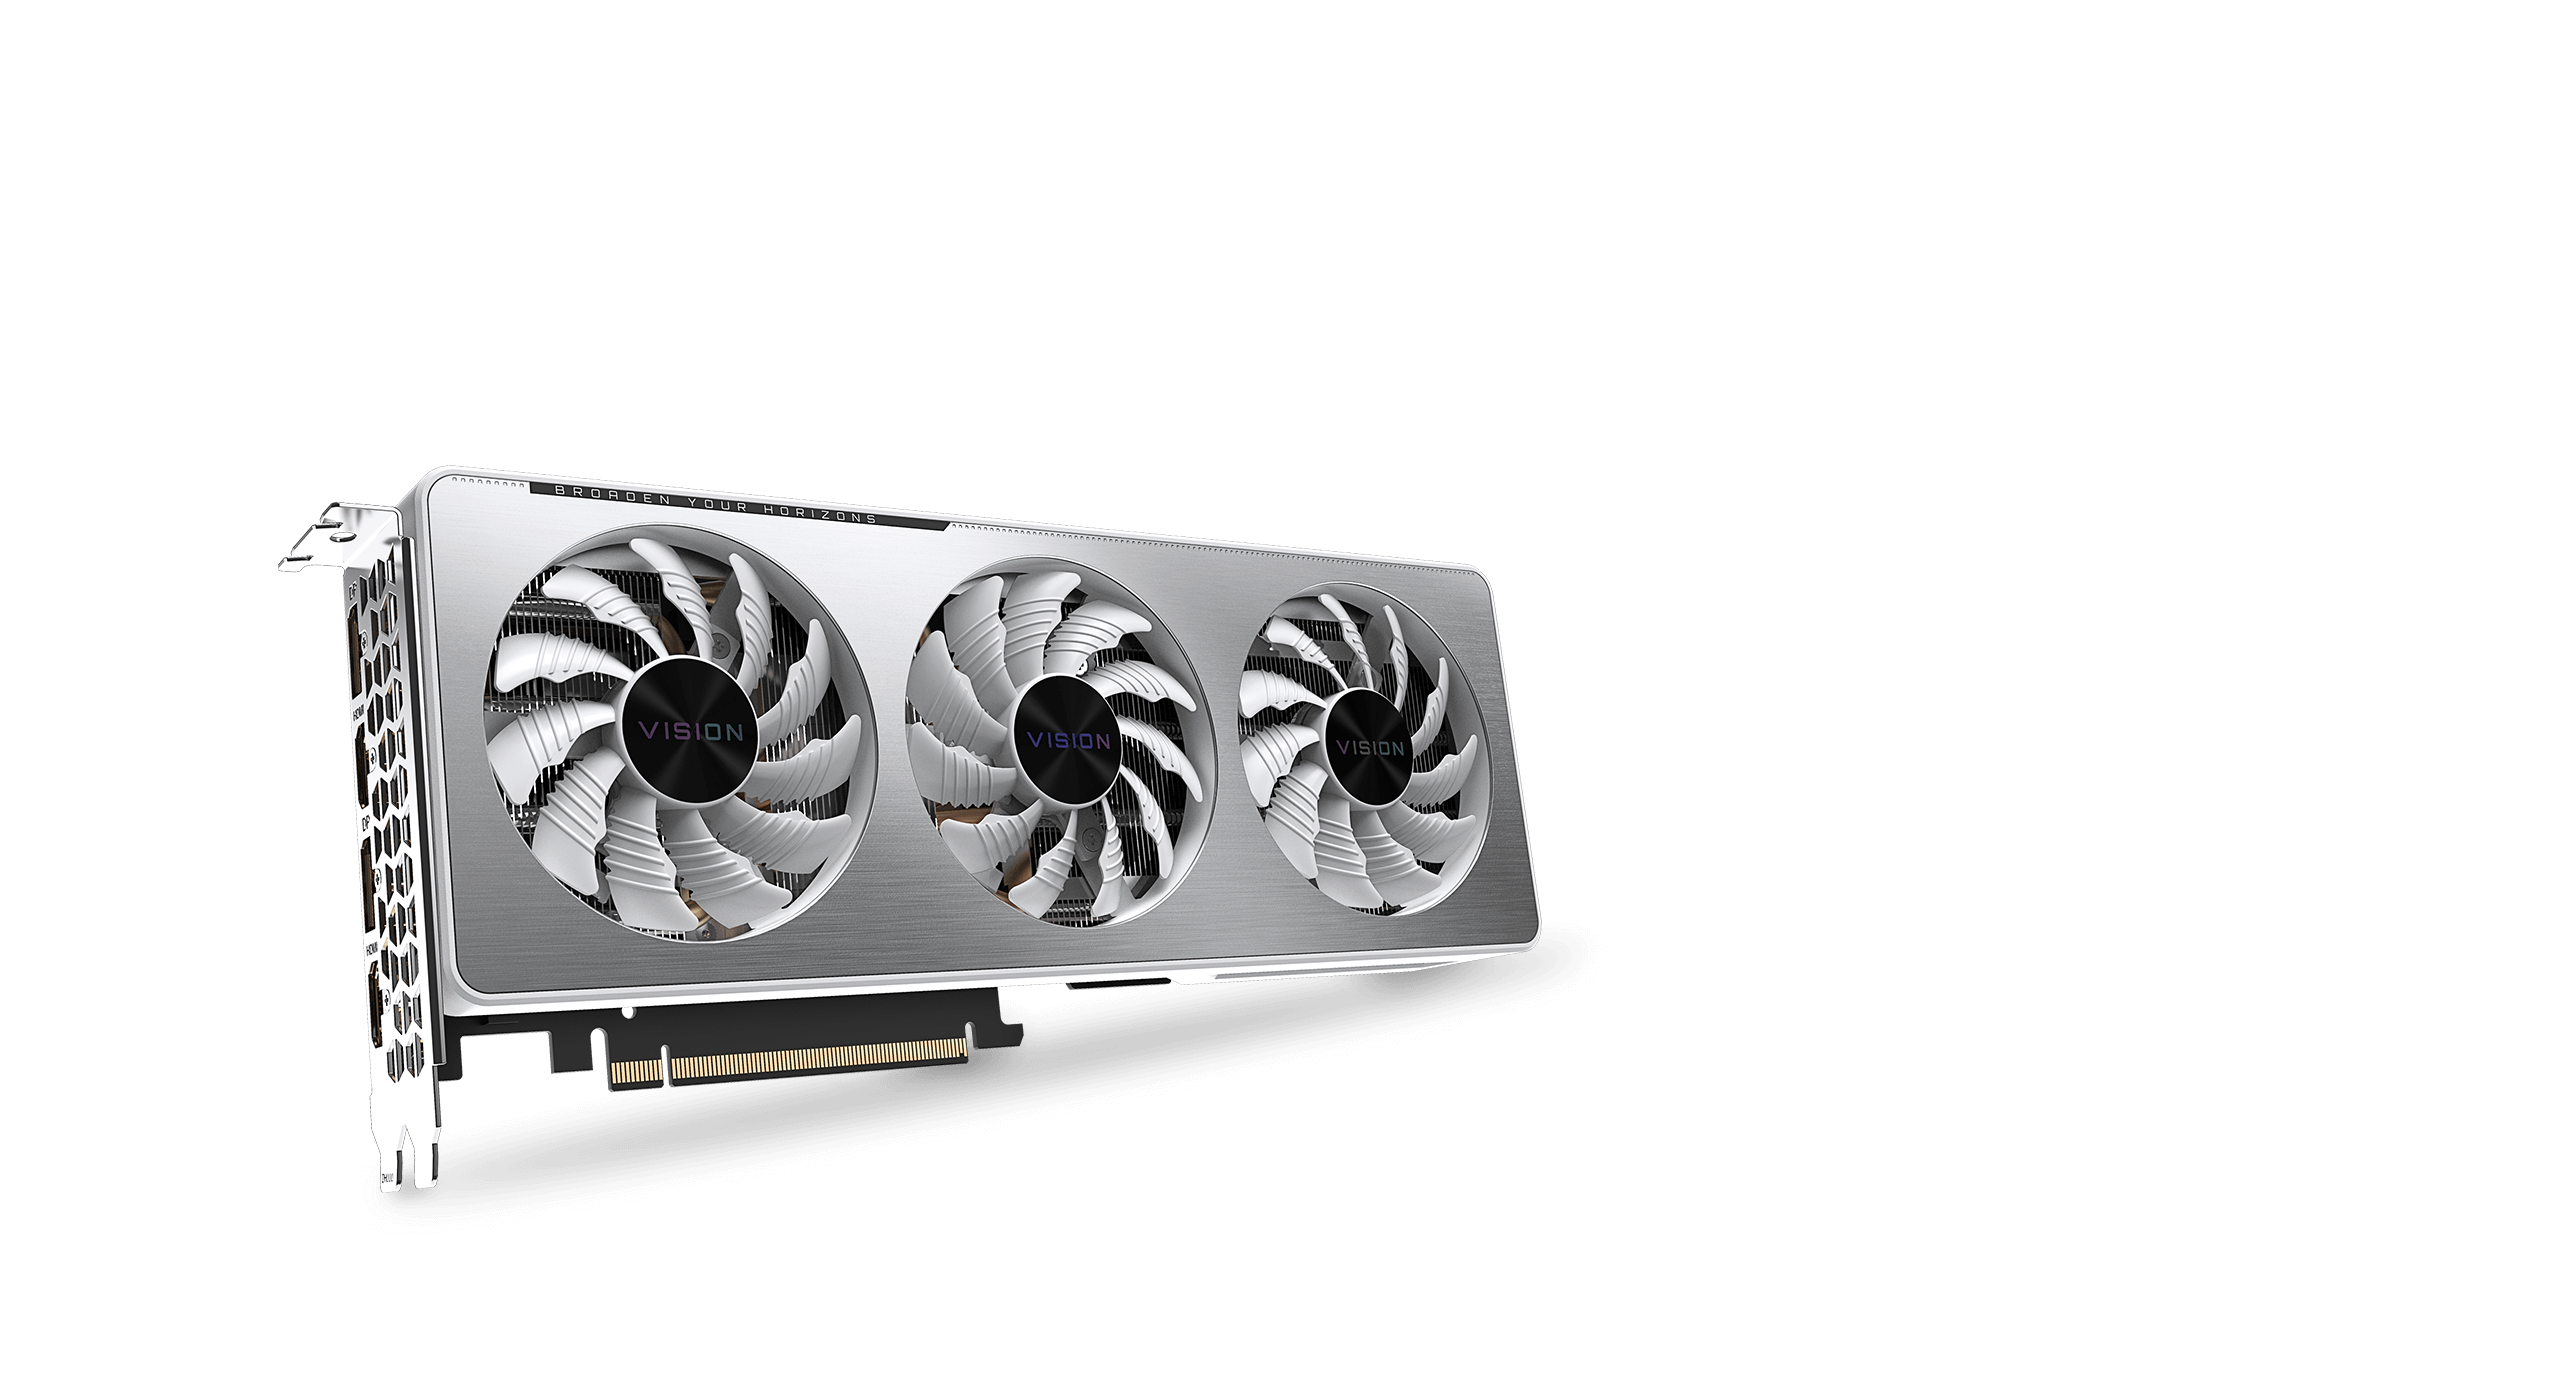 GeForce RTX™ 3060 Ti VISION OC 8G (rev. 1.0) Key Features 